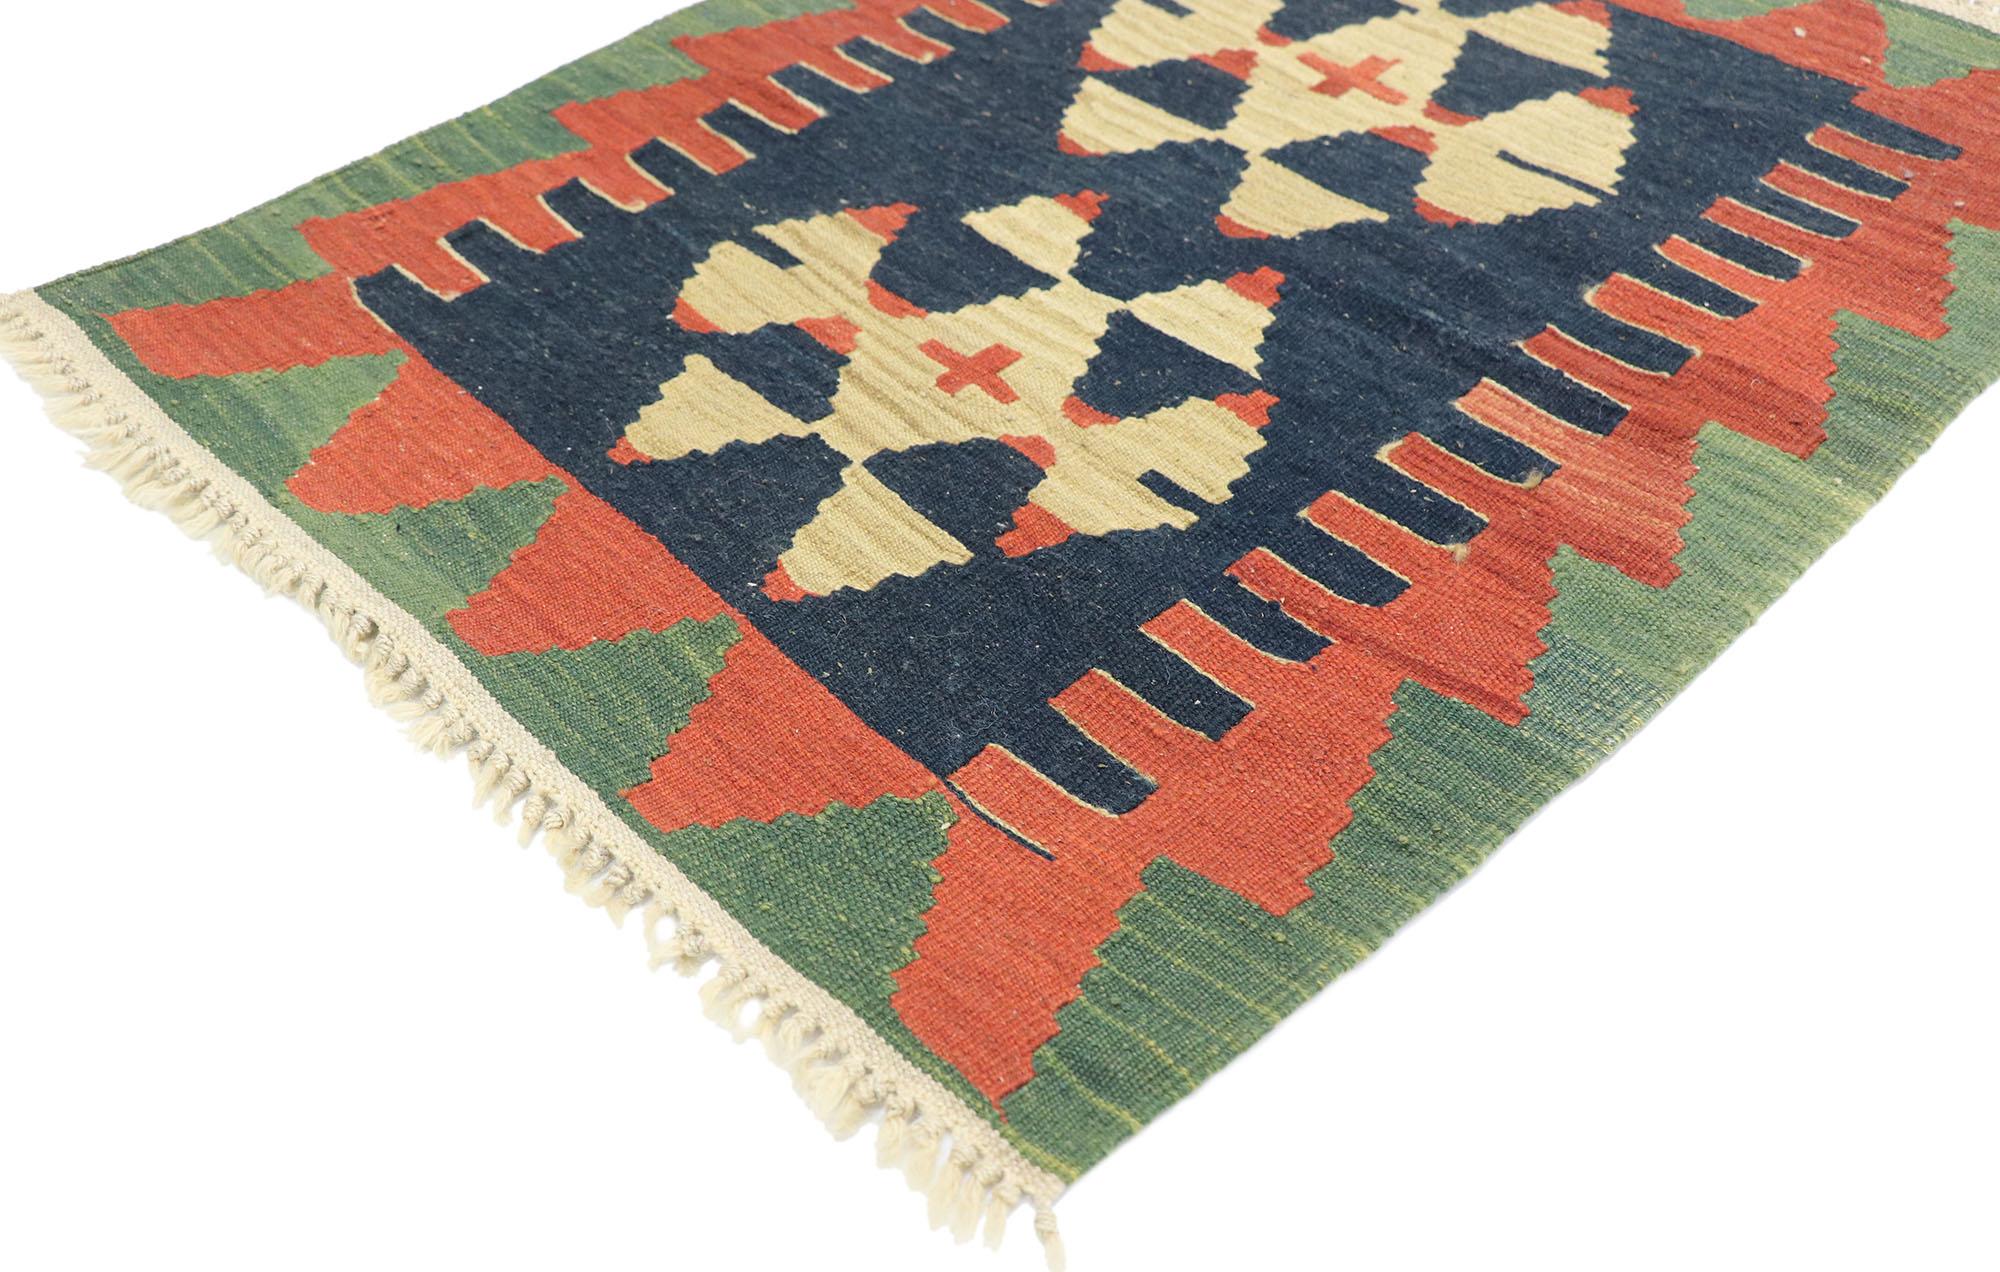 77891 Vintage Persian Shiraz Kilim rug with Tribal style 02'02 x 02'10. Full of tiny details and a bold expressive design combined with vibrant colors and tribal style, this hand-woven wool vintage Persian Shiraz kilim rug is a captivating vision of